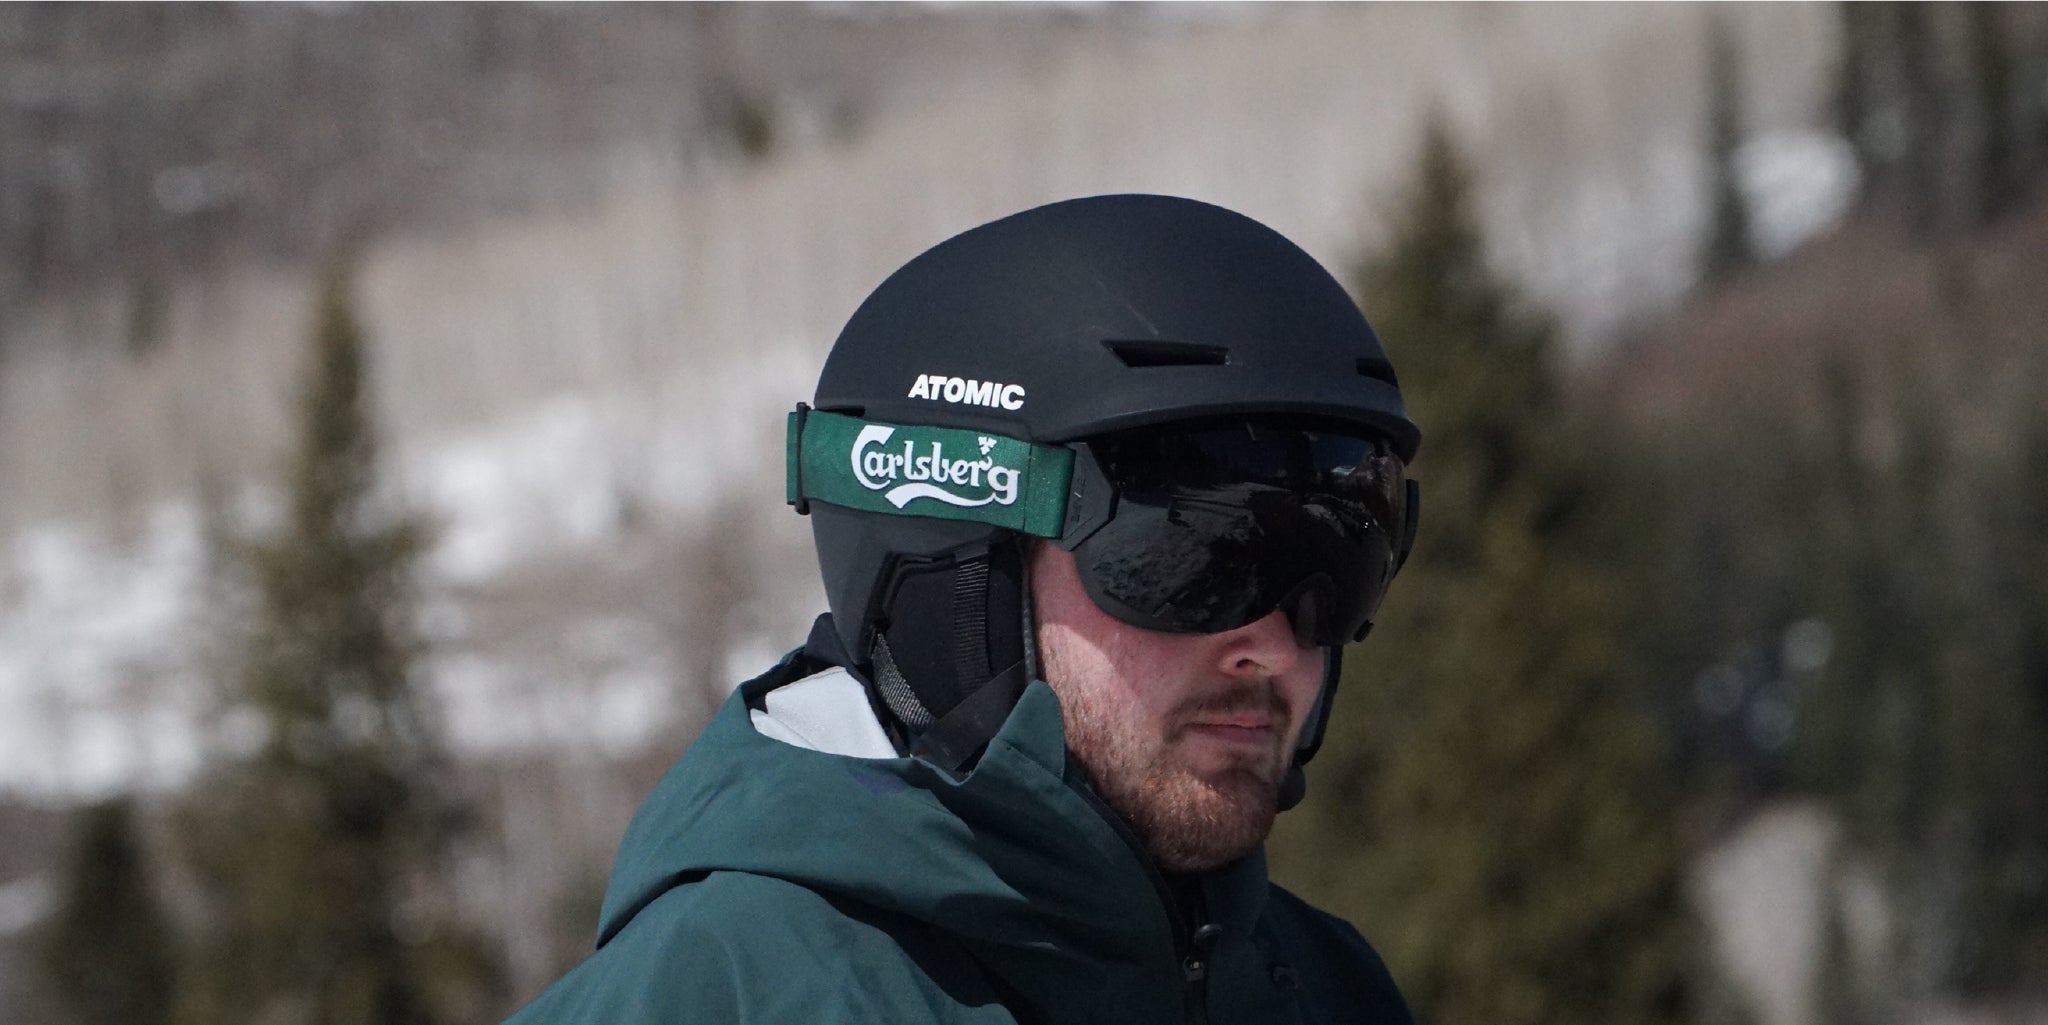 A man wearing STAGE custom goggles featuring the Carlsberg brand.